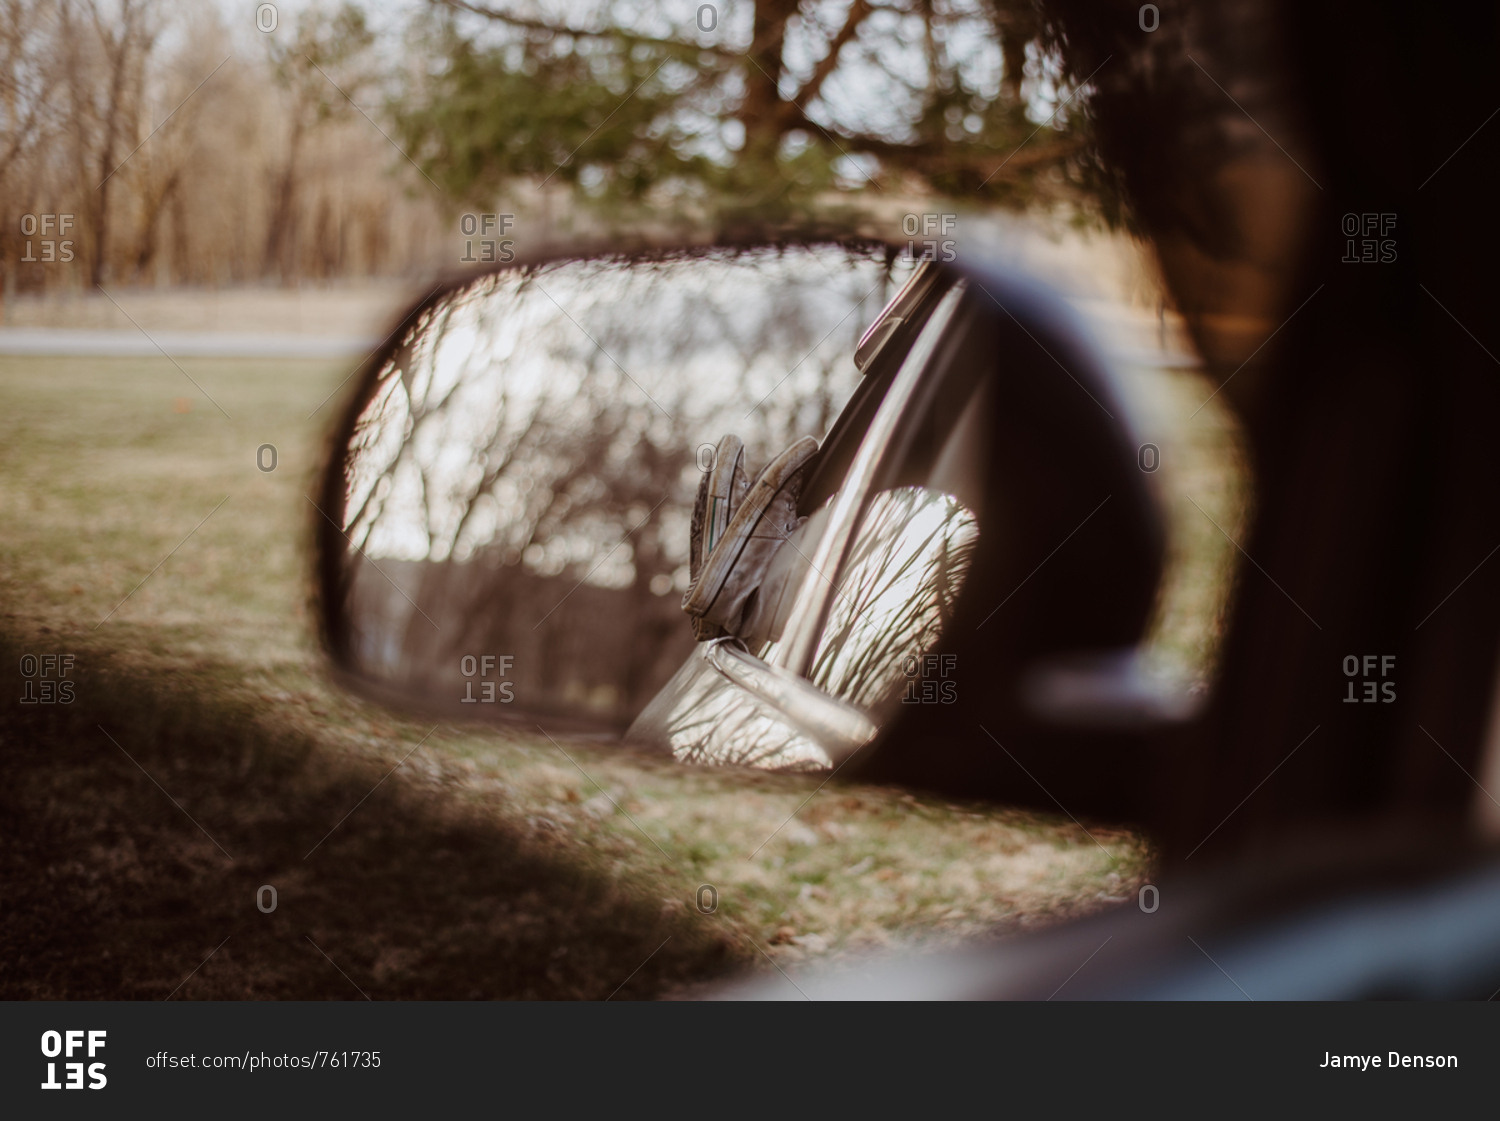 Reflection in side mirror of person sticking feet out car window